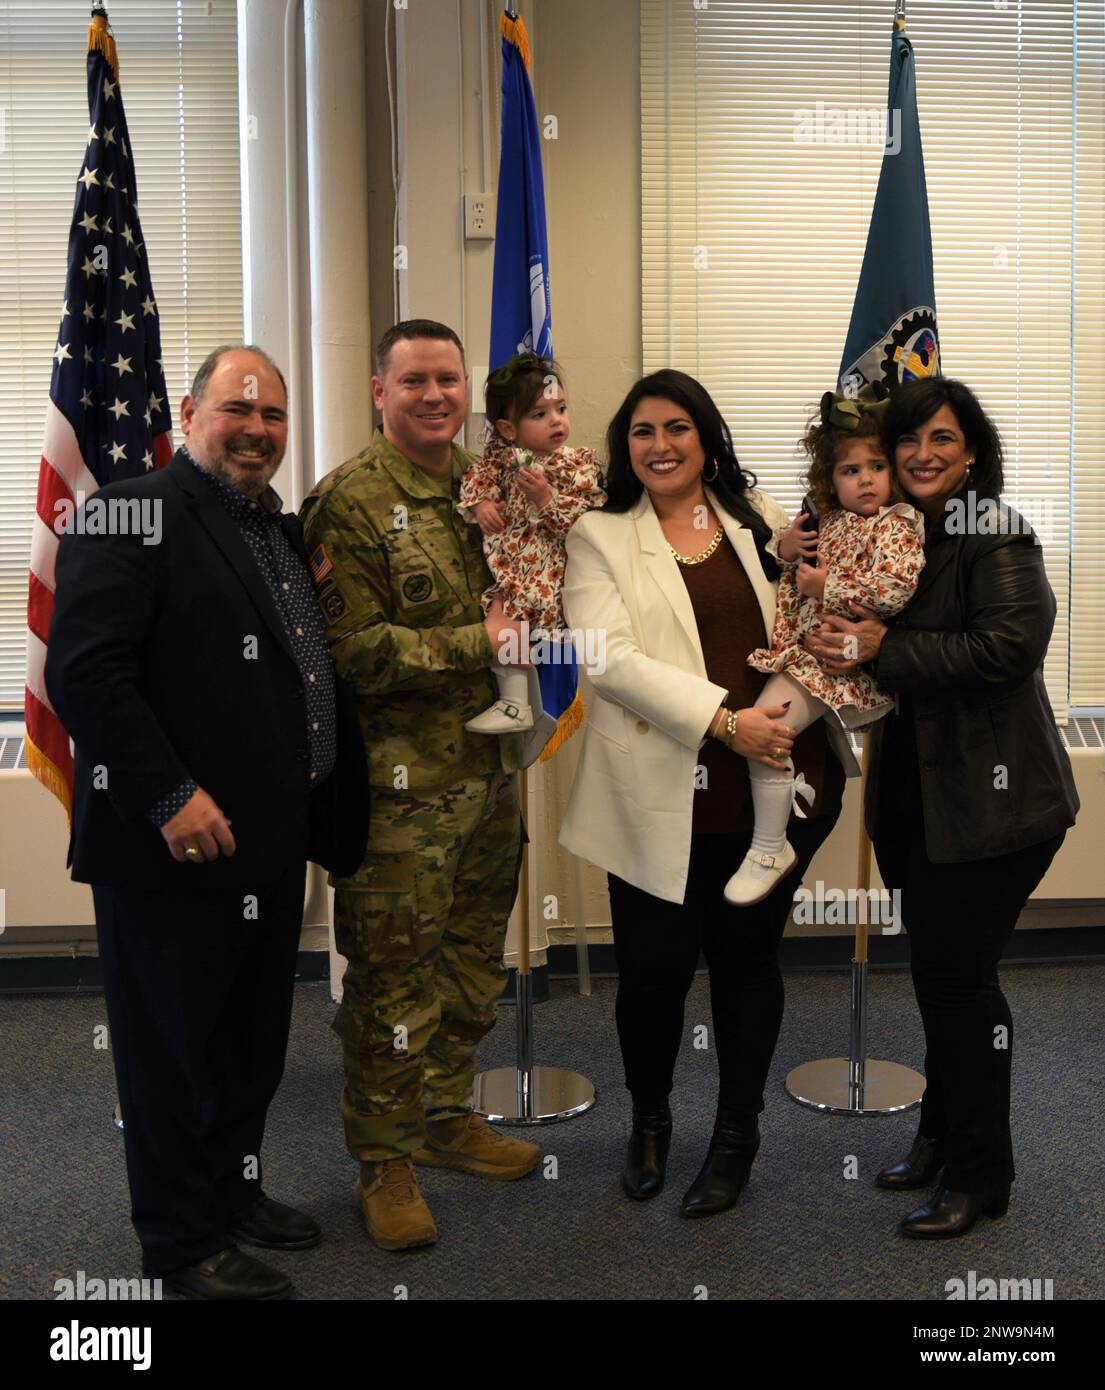 Andrew Munoz, Army Sustainment Command G1 sergeant major, stands with his wife, Natalie Munoz, daughters Zoe, 2, and Isabella, 1, father-in-law Albert Capdevila and mother-in-law Chery Capdevila, during his promotion ceremony to sergeant major on Jan. 9 at Rock Island Arsenal, Illinois. Stock Photo